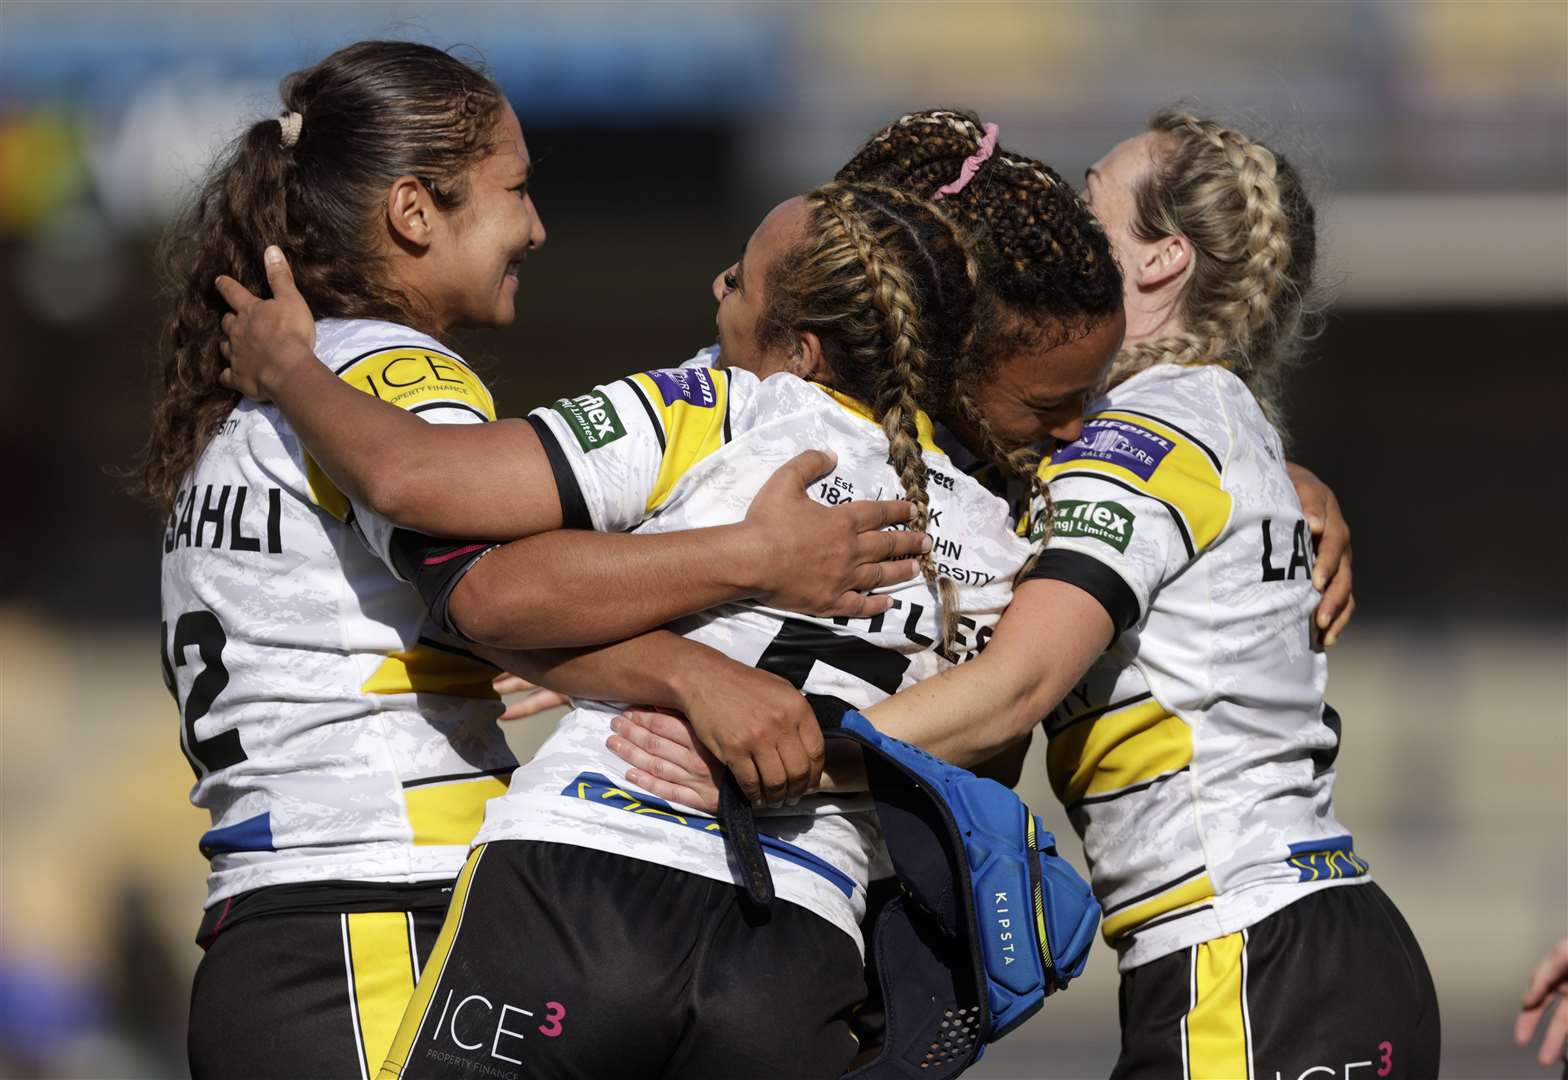 Women and girls are continuing to make advances in sports such as rugby league (Richard Sellers/PA)